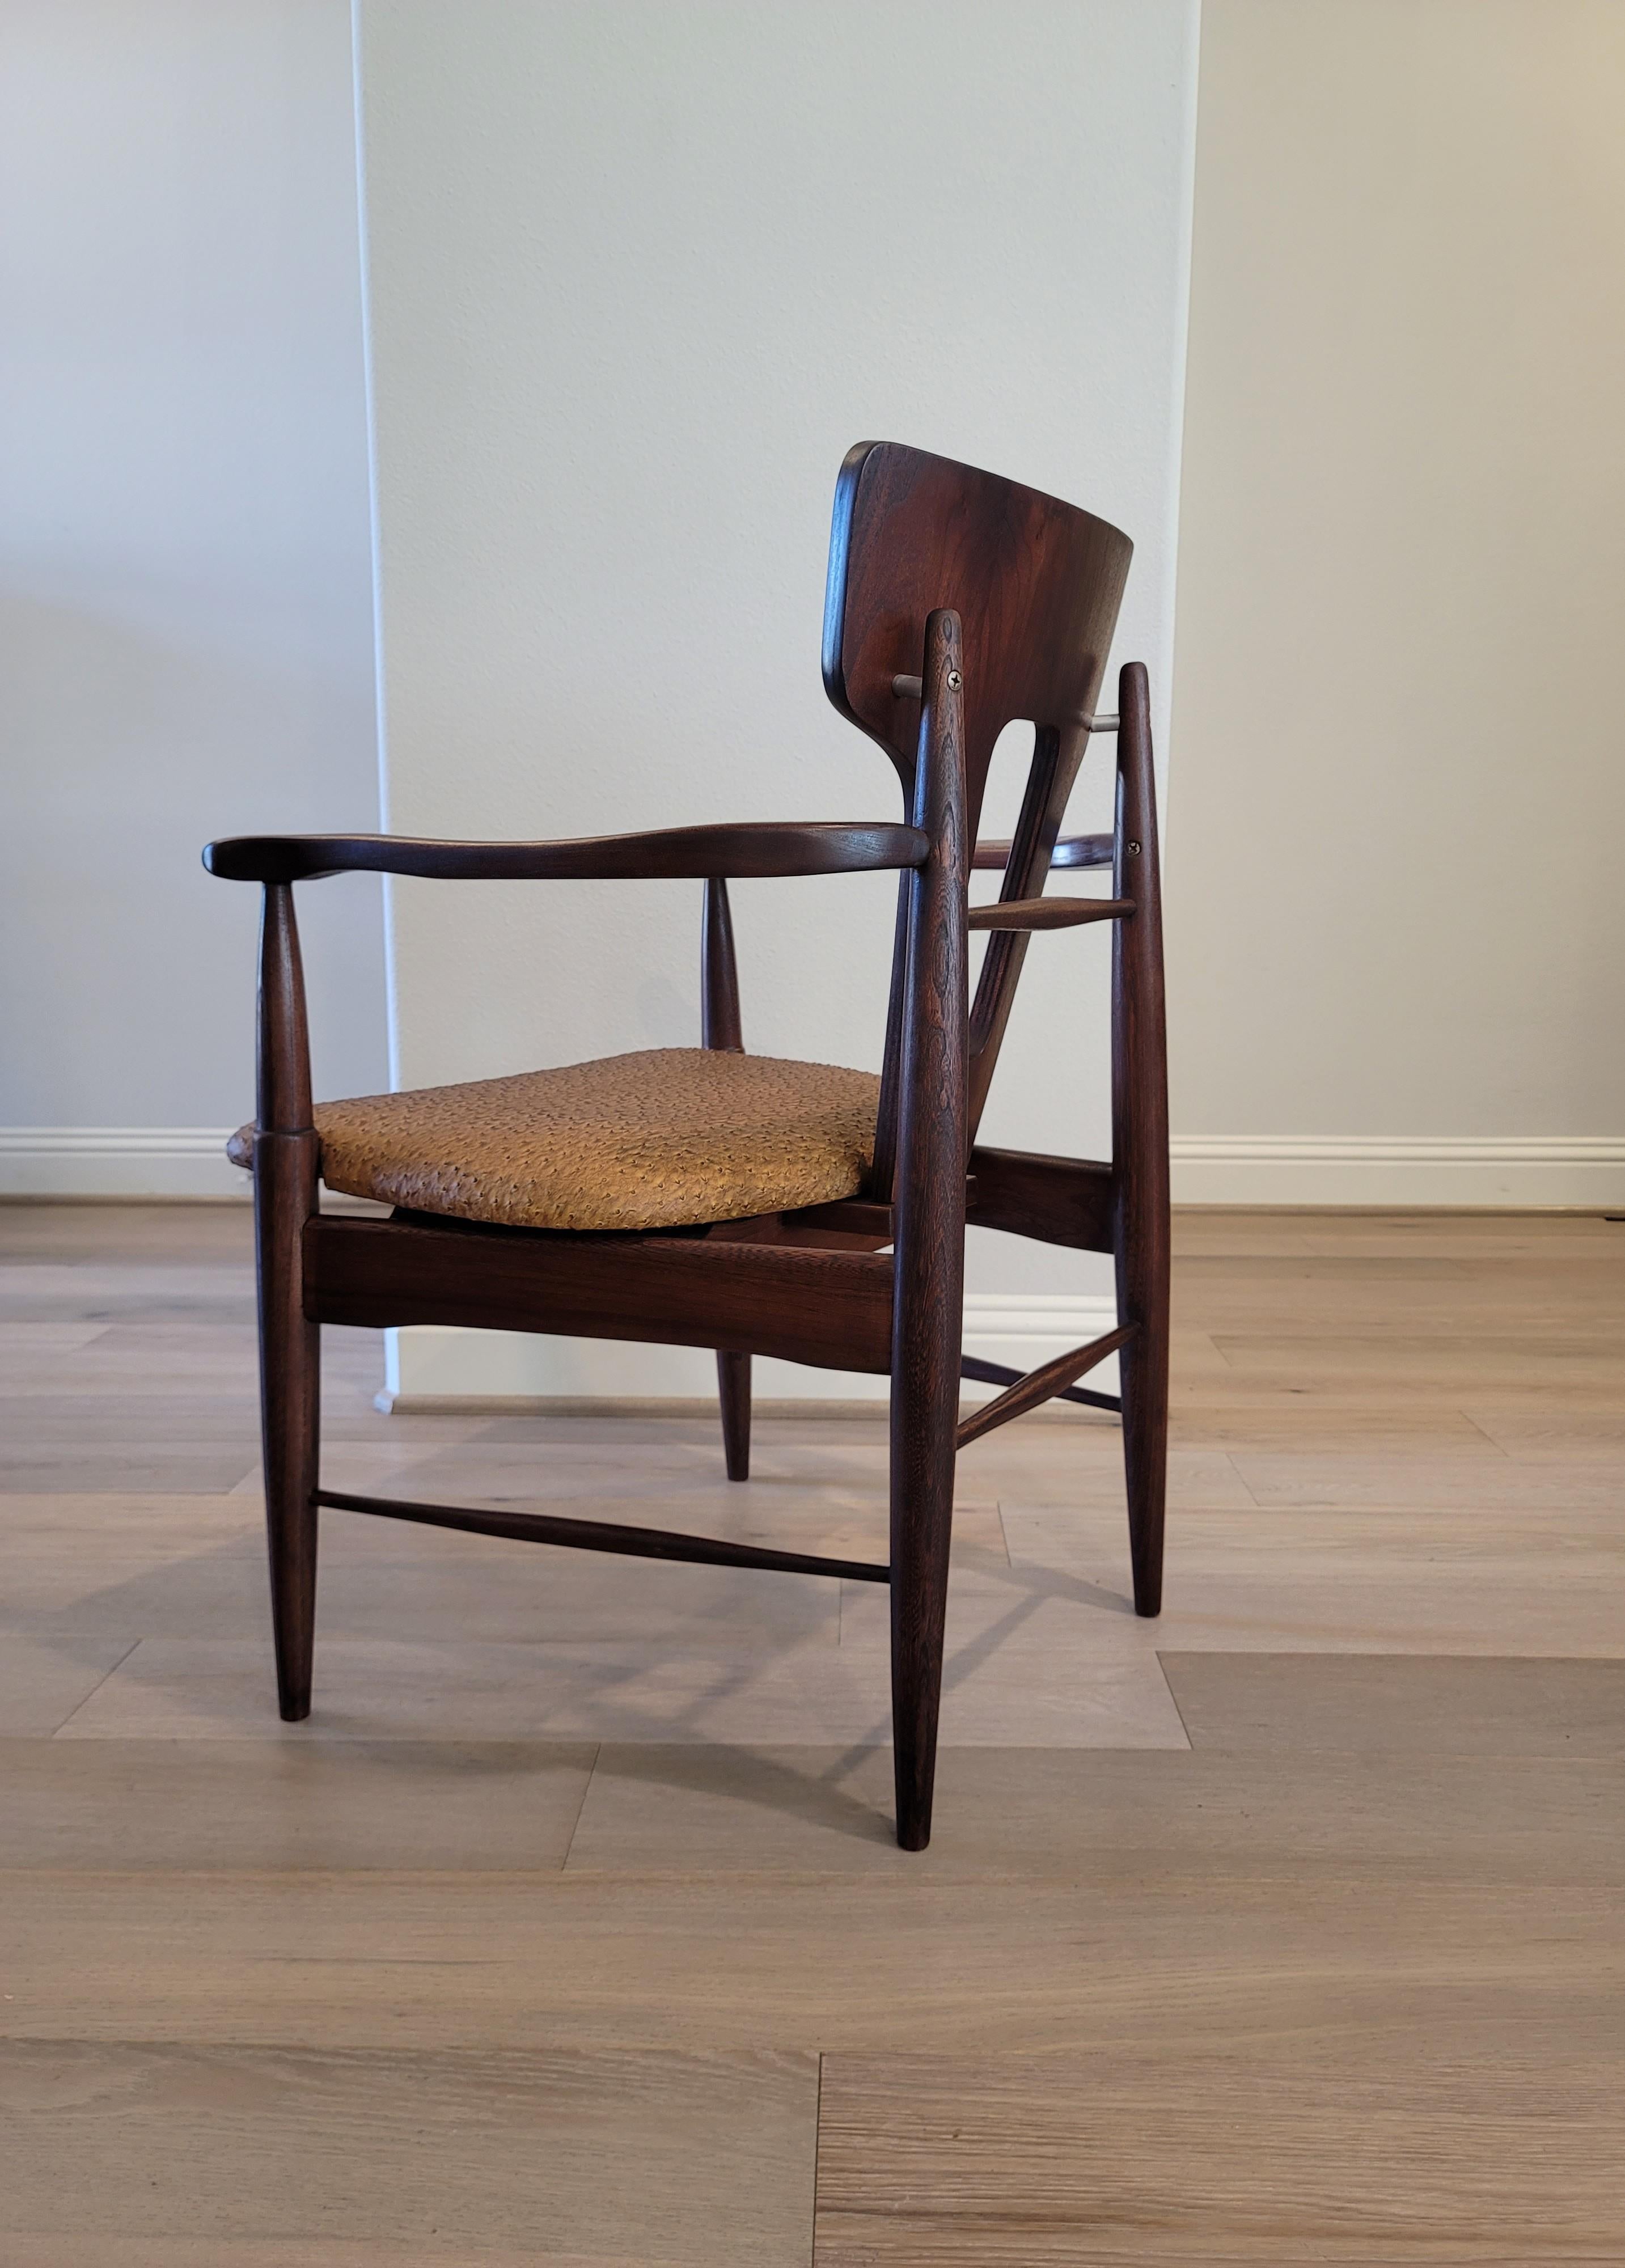 20th Century Mid-Century Modern Teak Chair with Ostrich Upholstery  For Sale